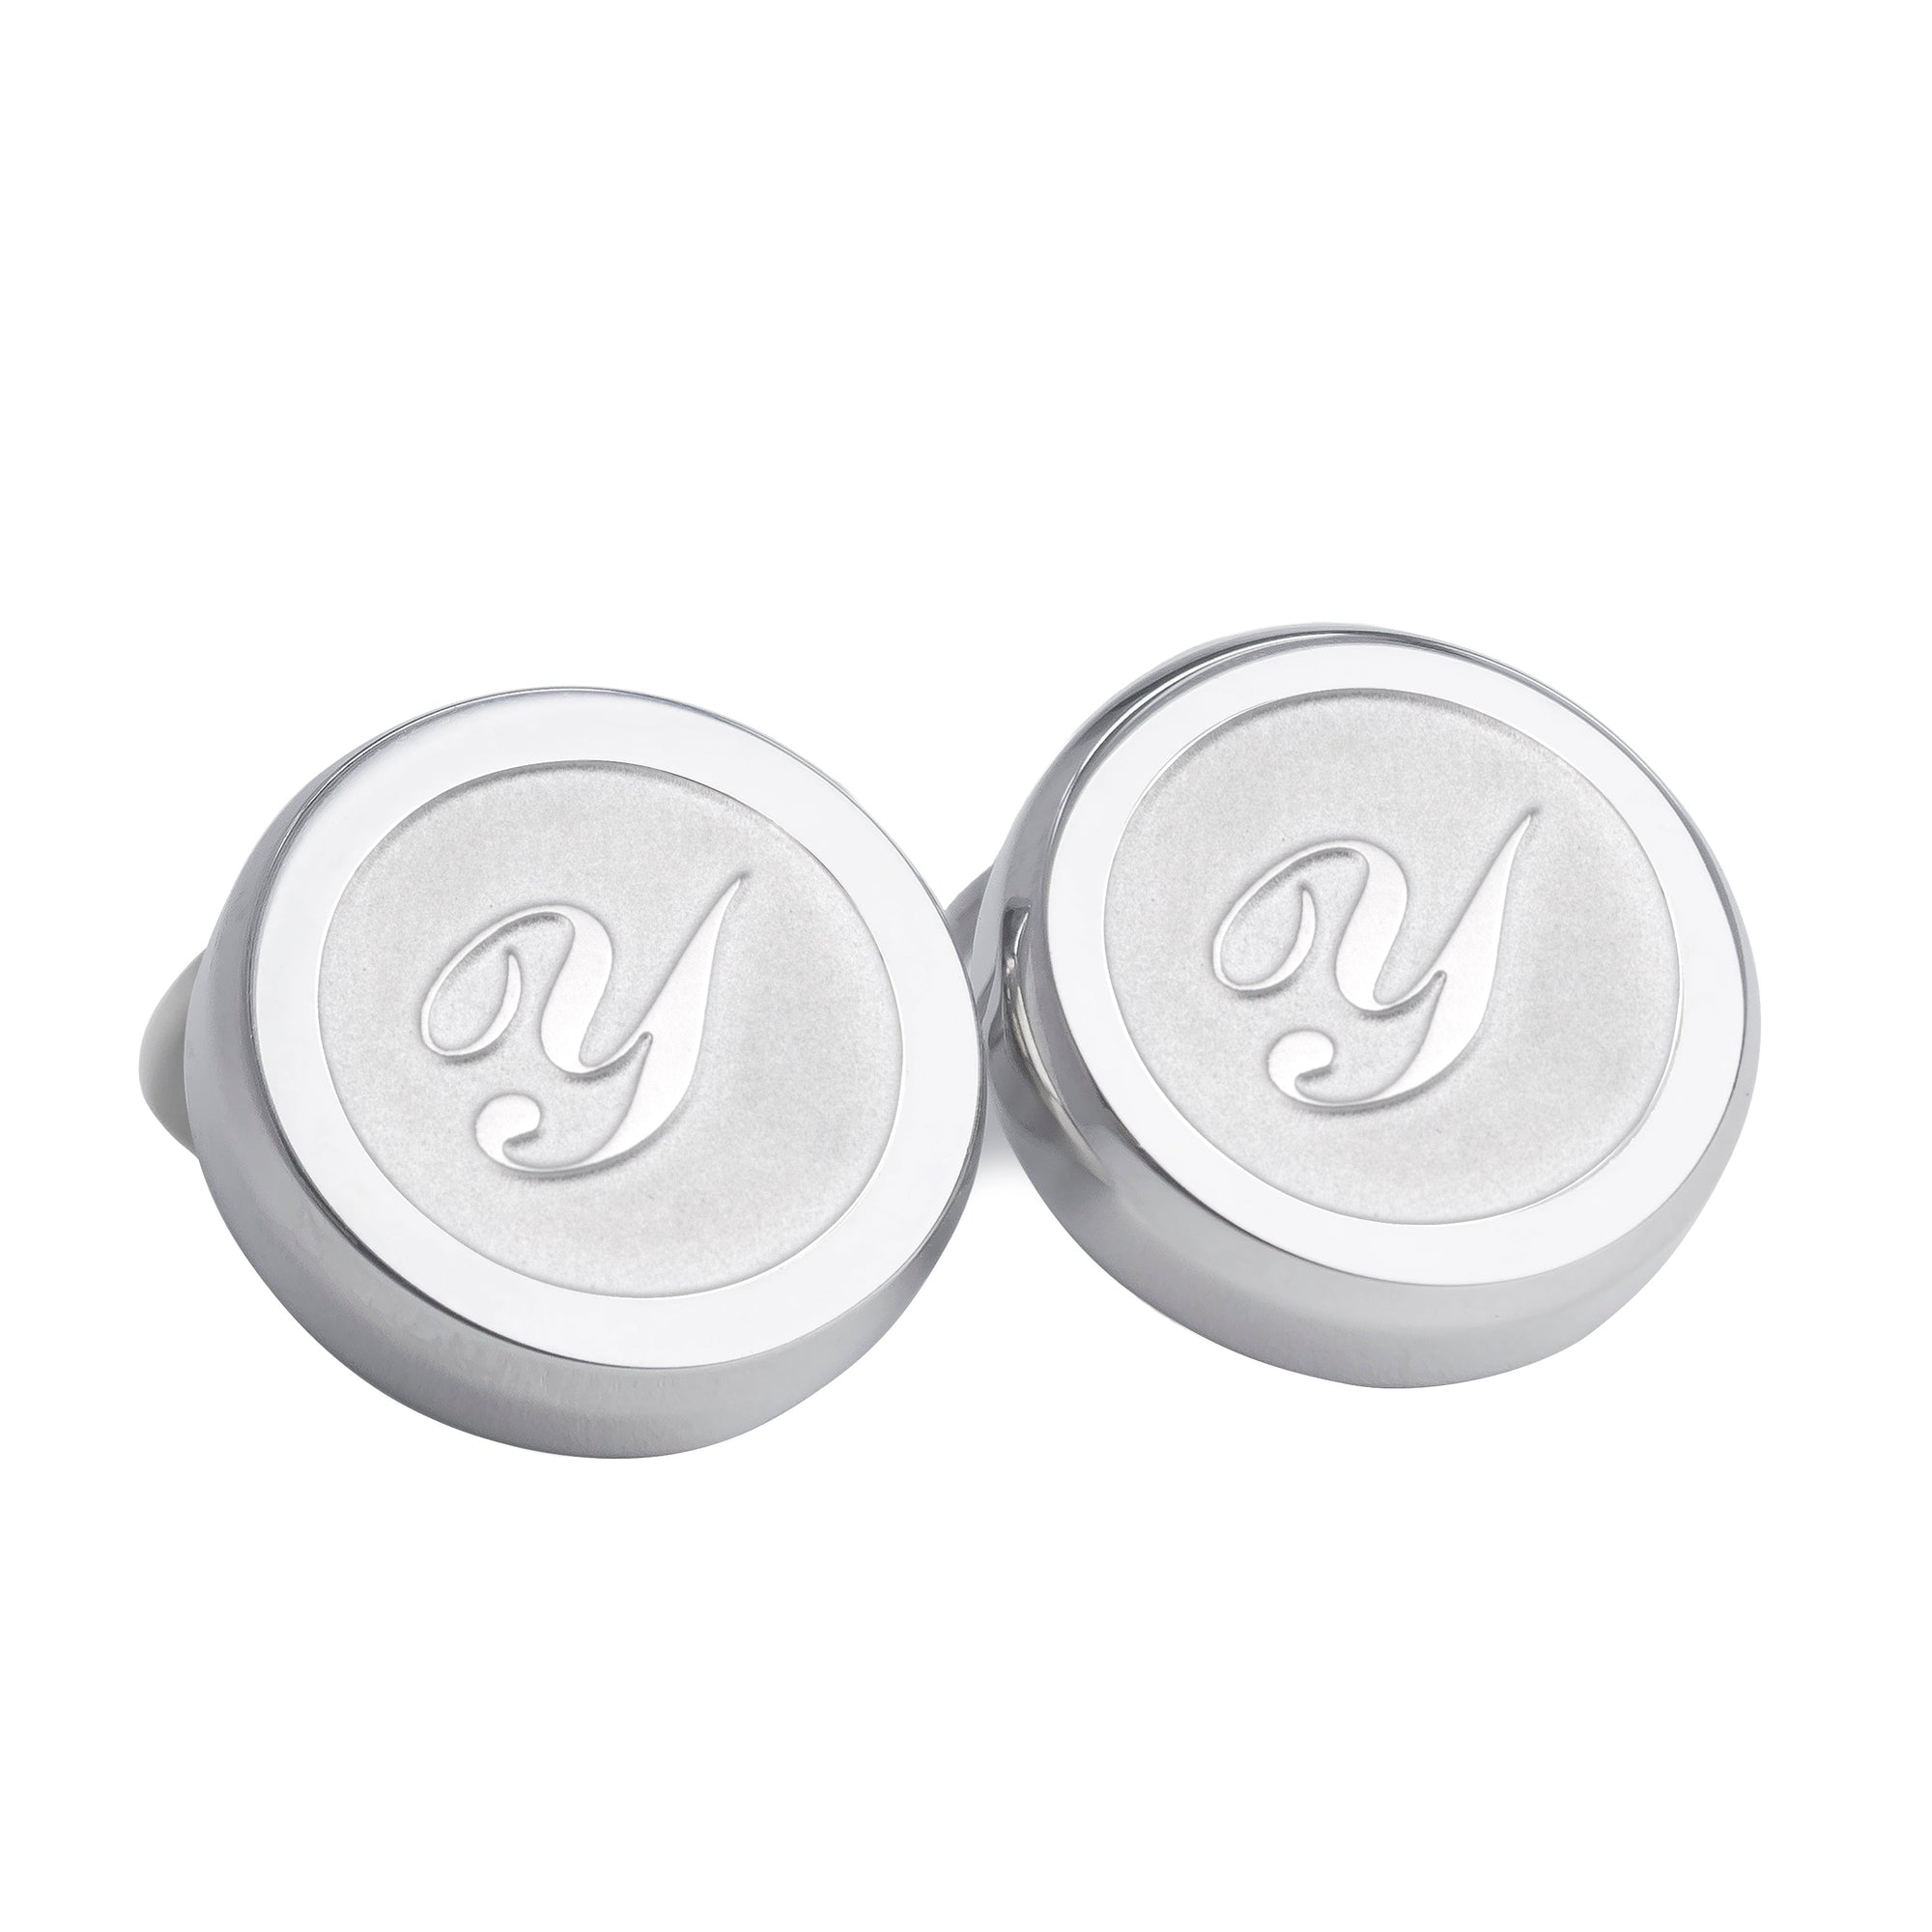 Monogram Etched Silver Clip-on Button Covers-Button Covers-A.Azthom-Y-Cufflinks.com.sg